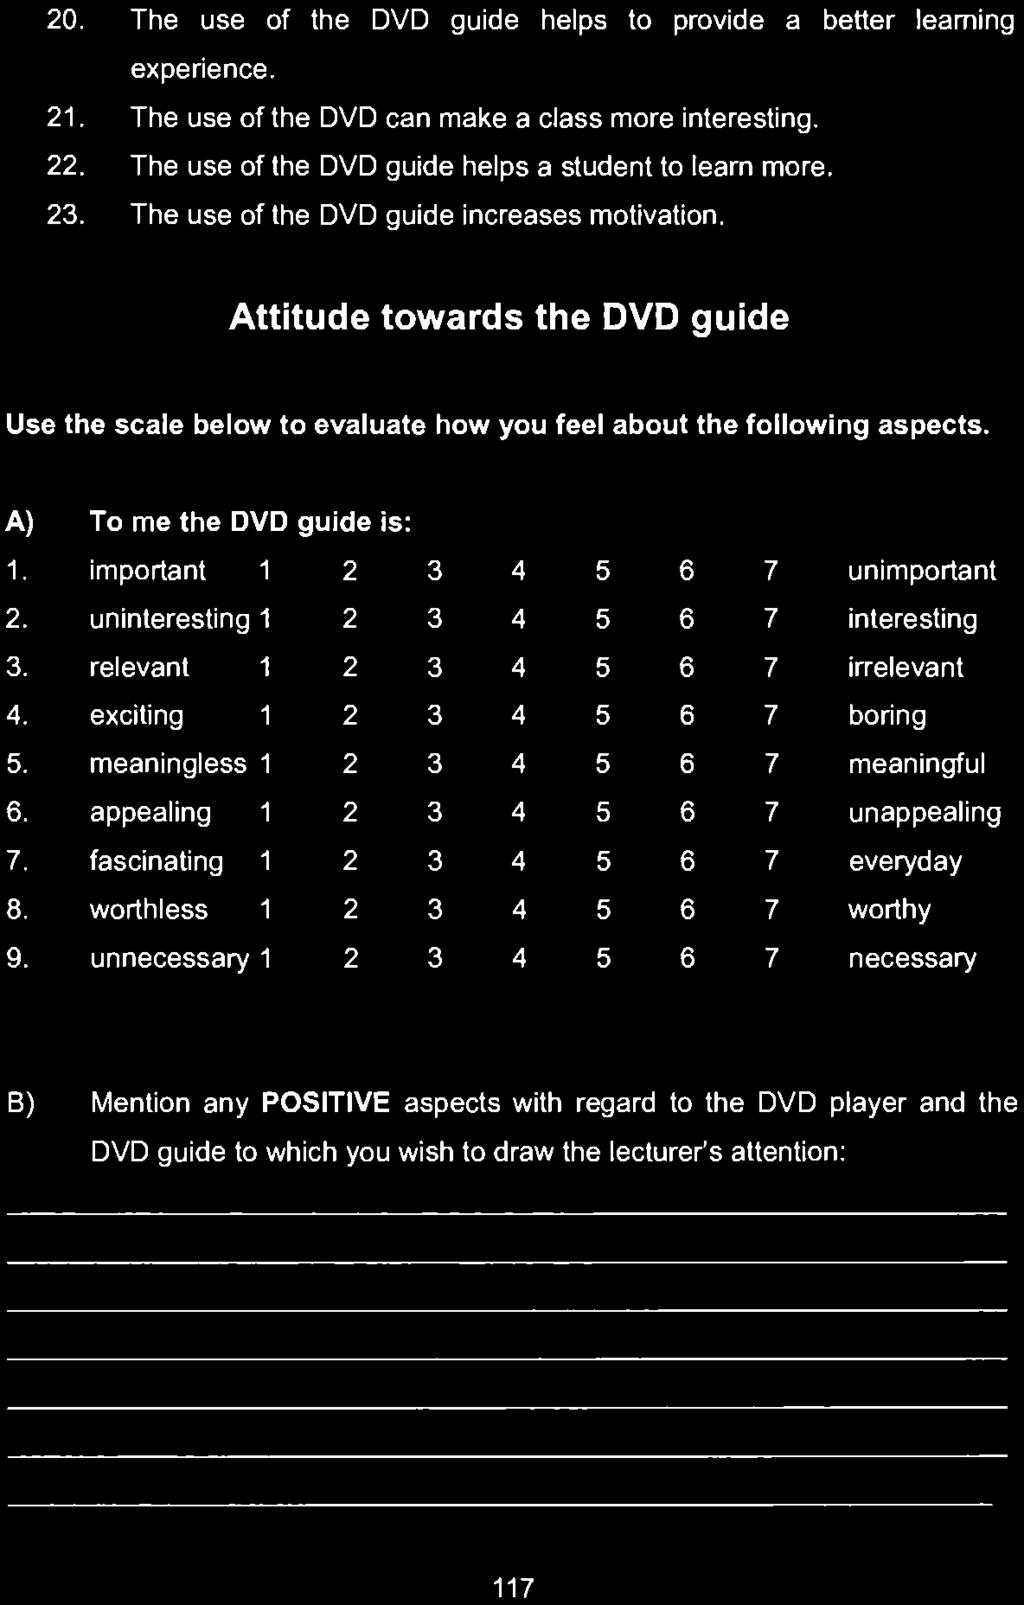 20, The use of the DVD guide helps to provide a better learning experience. 21. The use of the DVD can make a class more interesting. 22. The use of the DVD guide helps a student to learn more. 23.